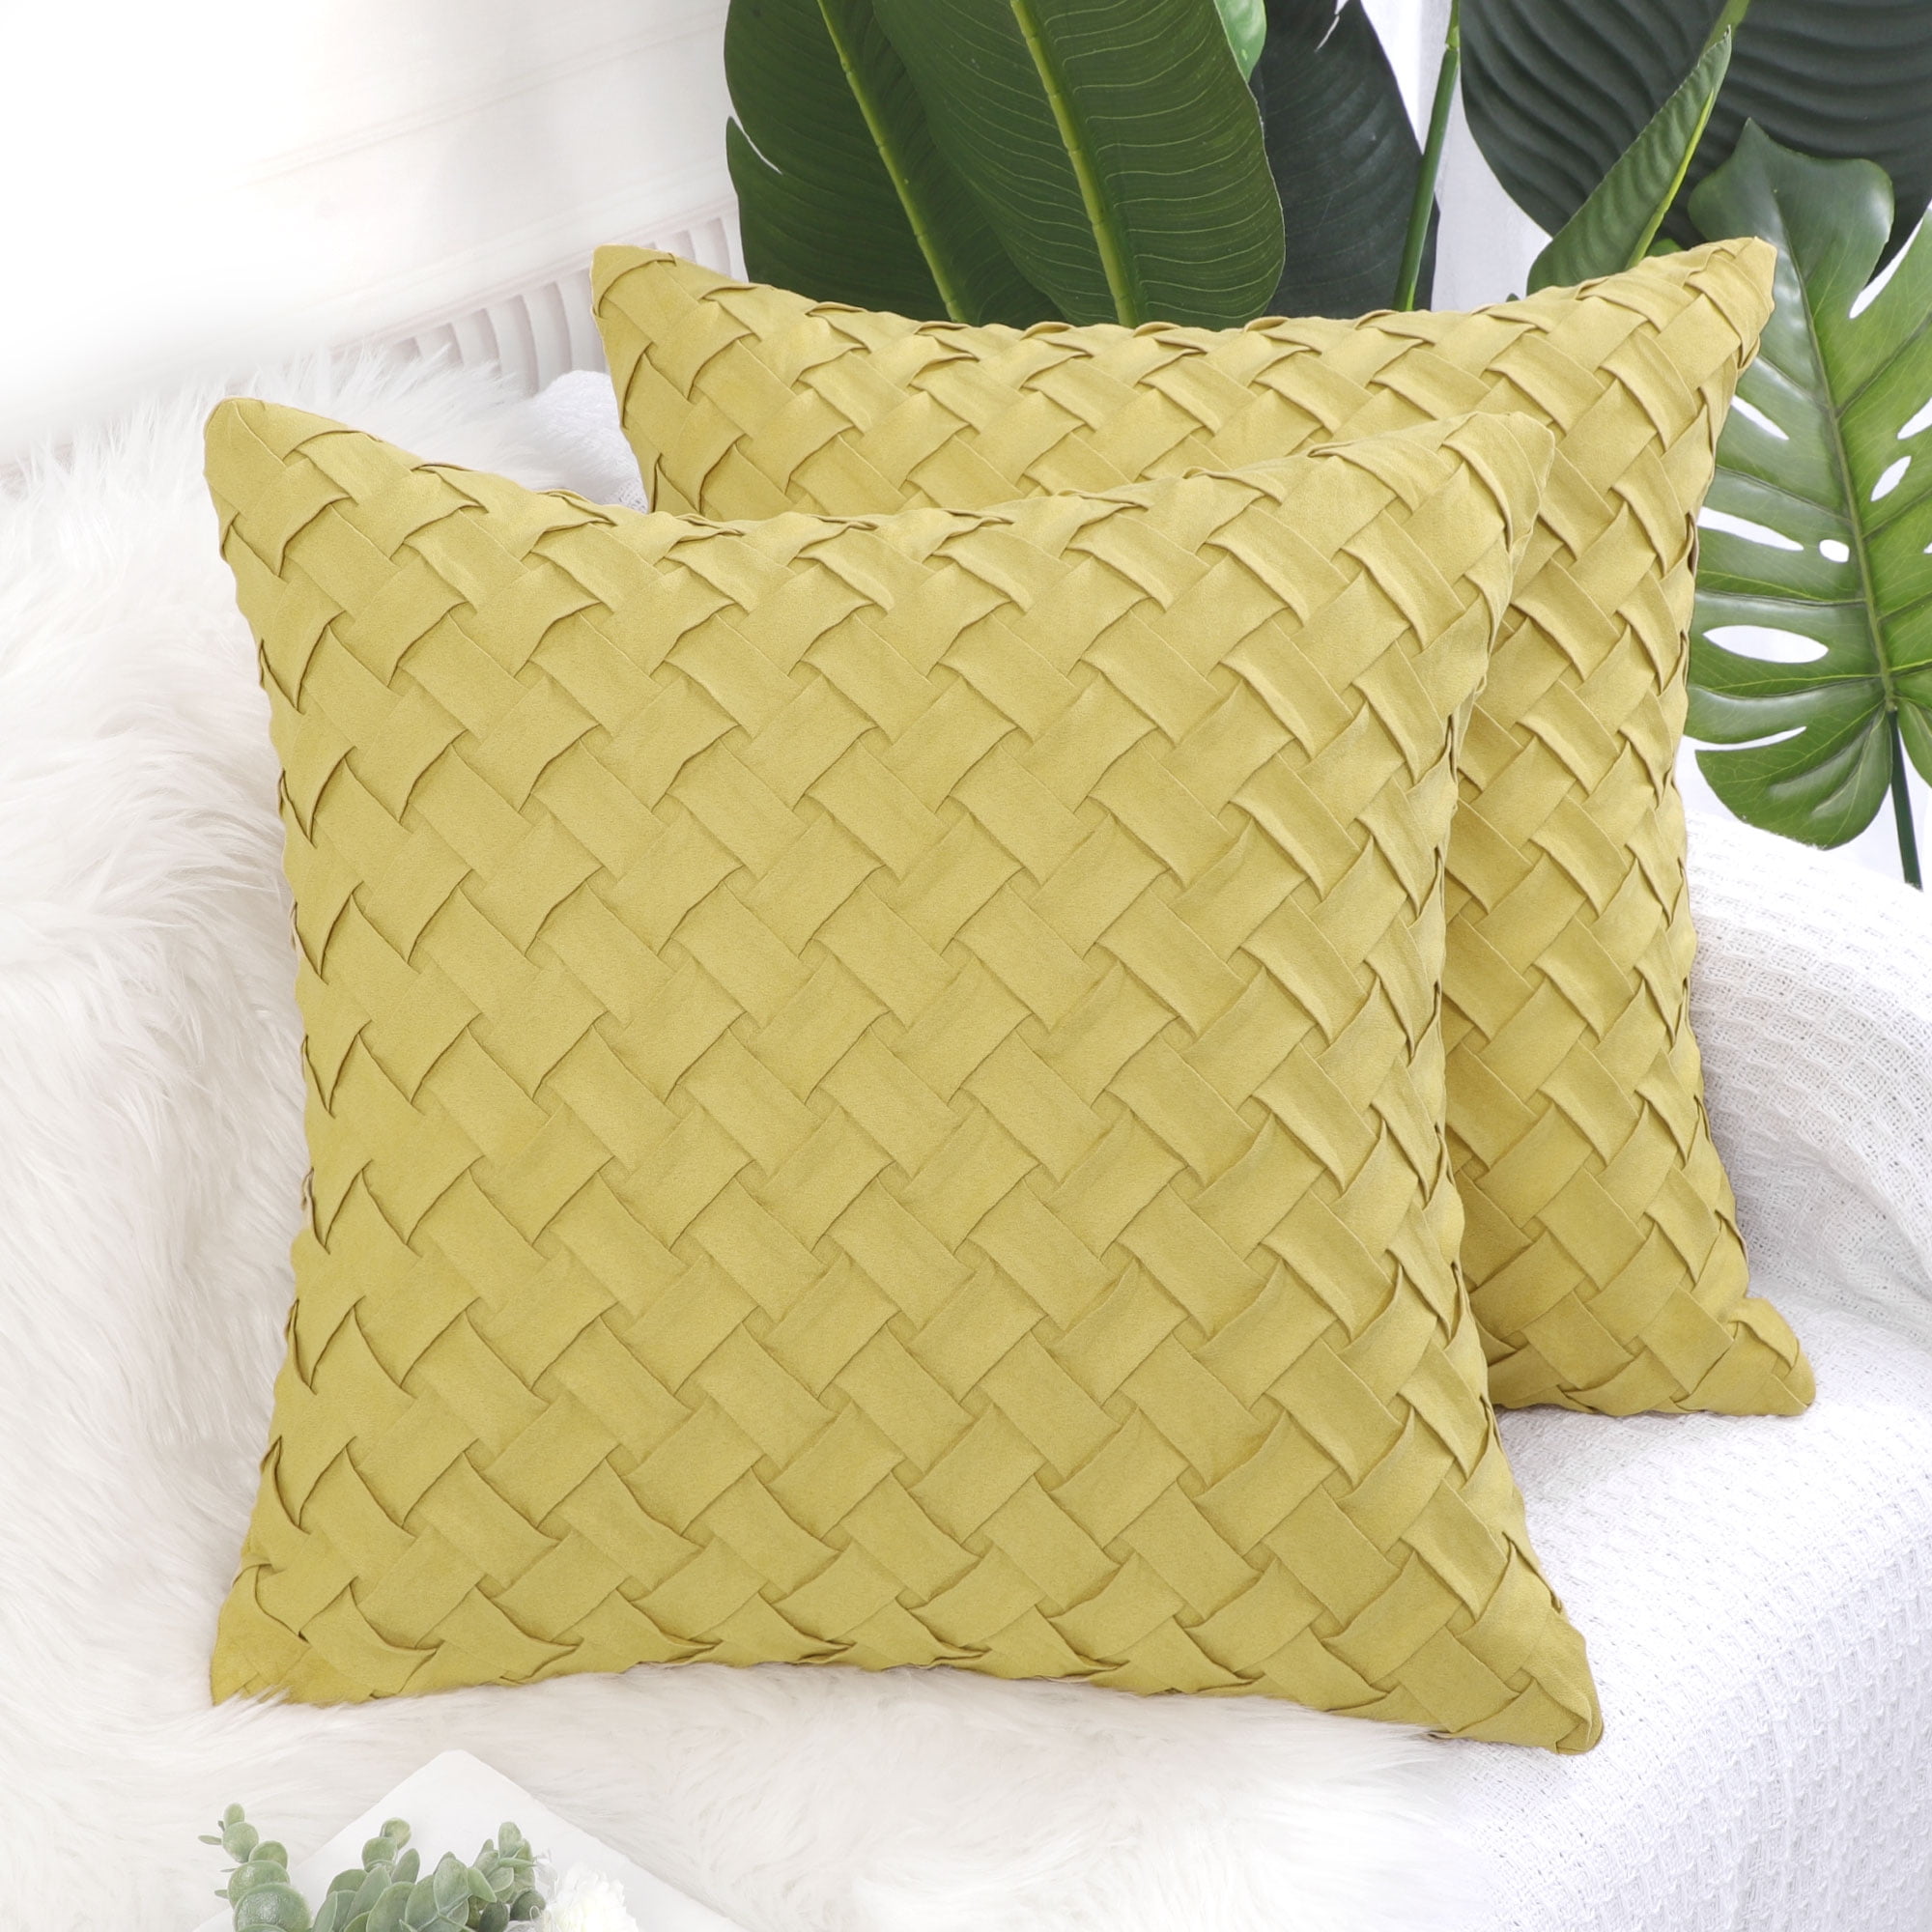 Yellow and Black Paisley Pillow Cover 18":x18"Zipper closure 